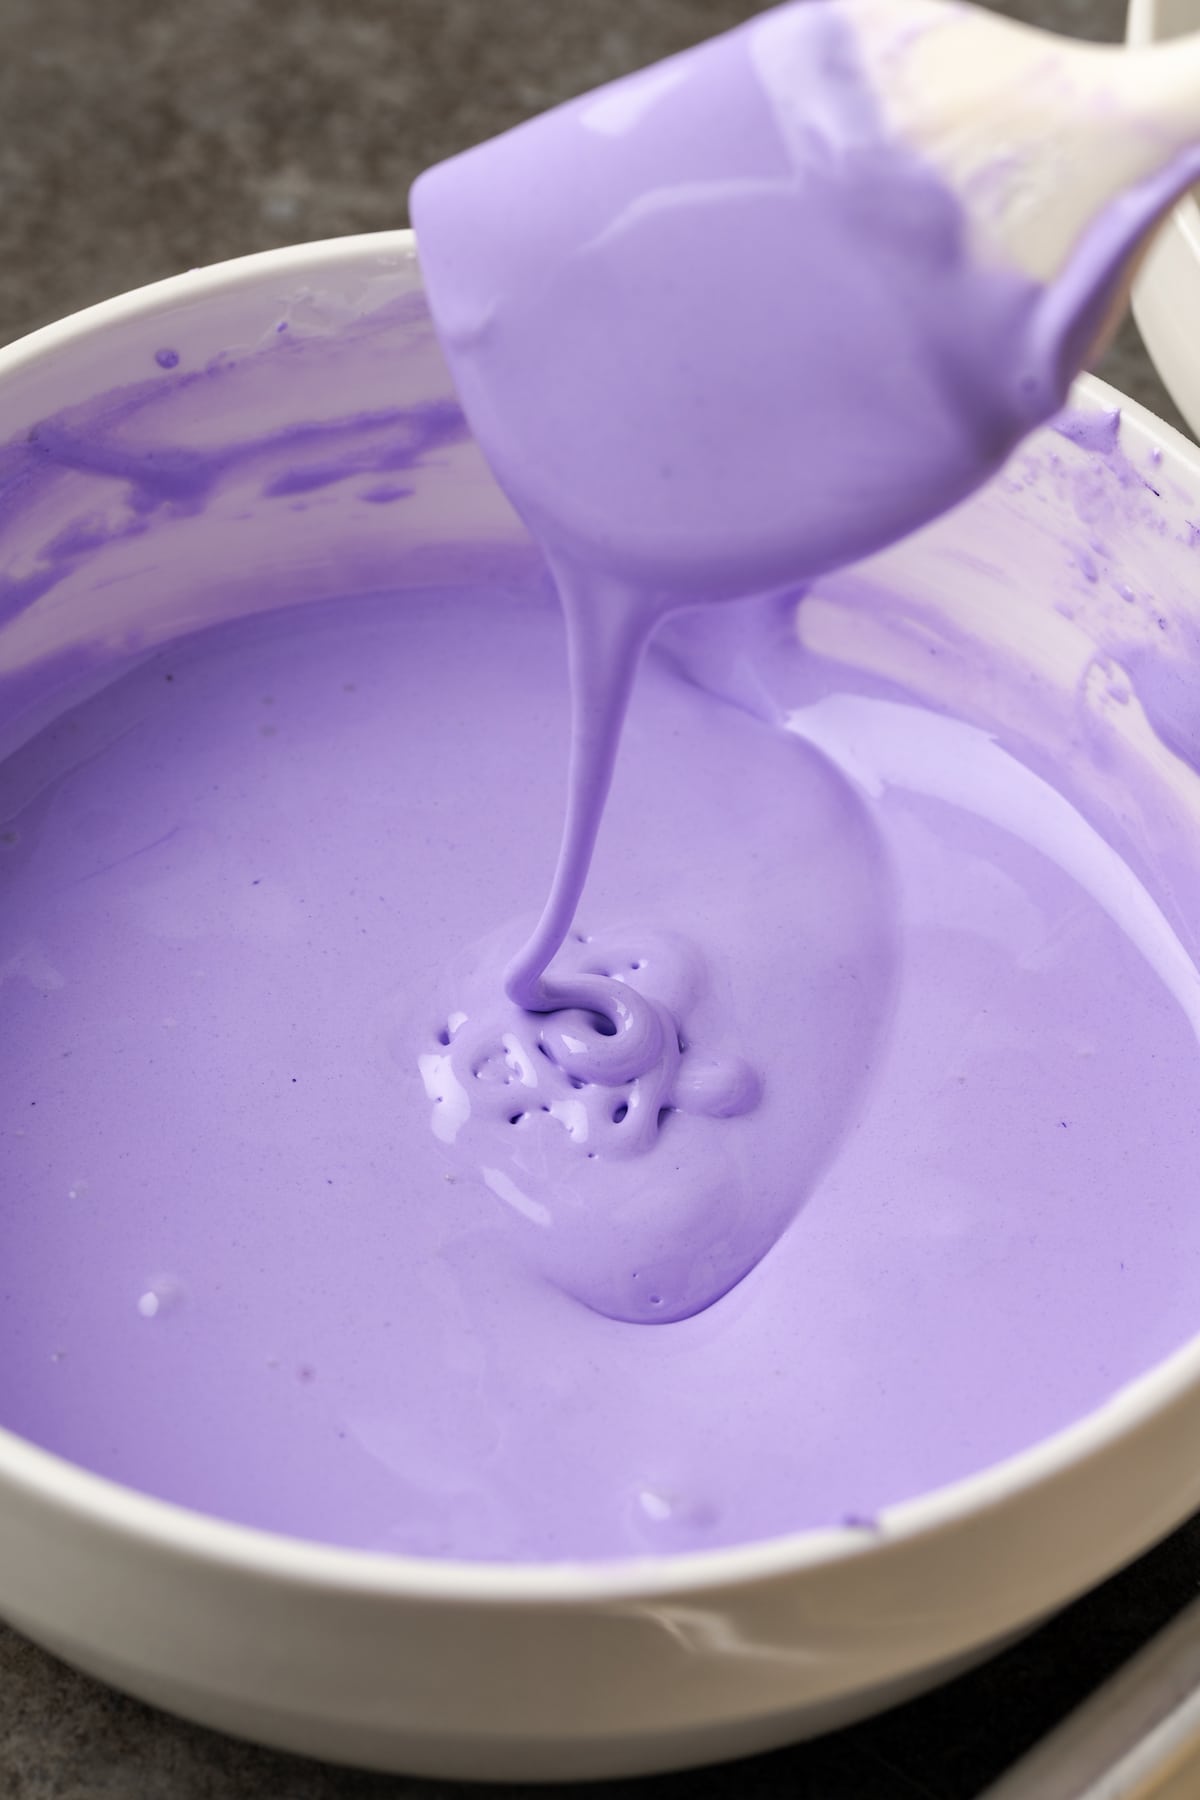 A rubber spatula drizzles purple royal icing into a bowl, showing the icing consistency needed for flooding.